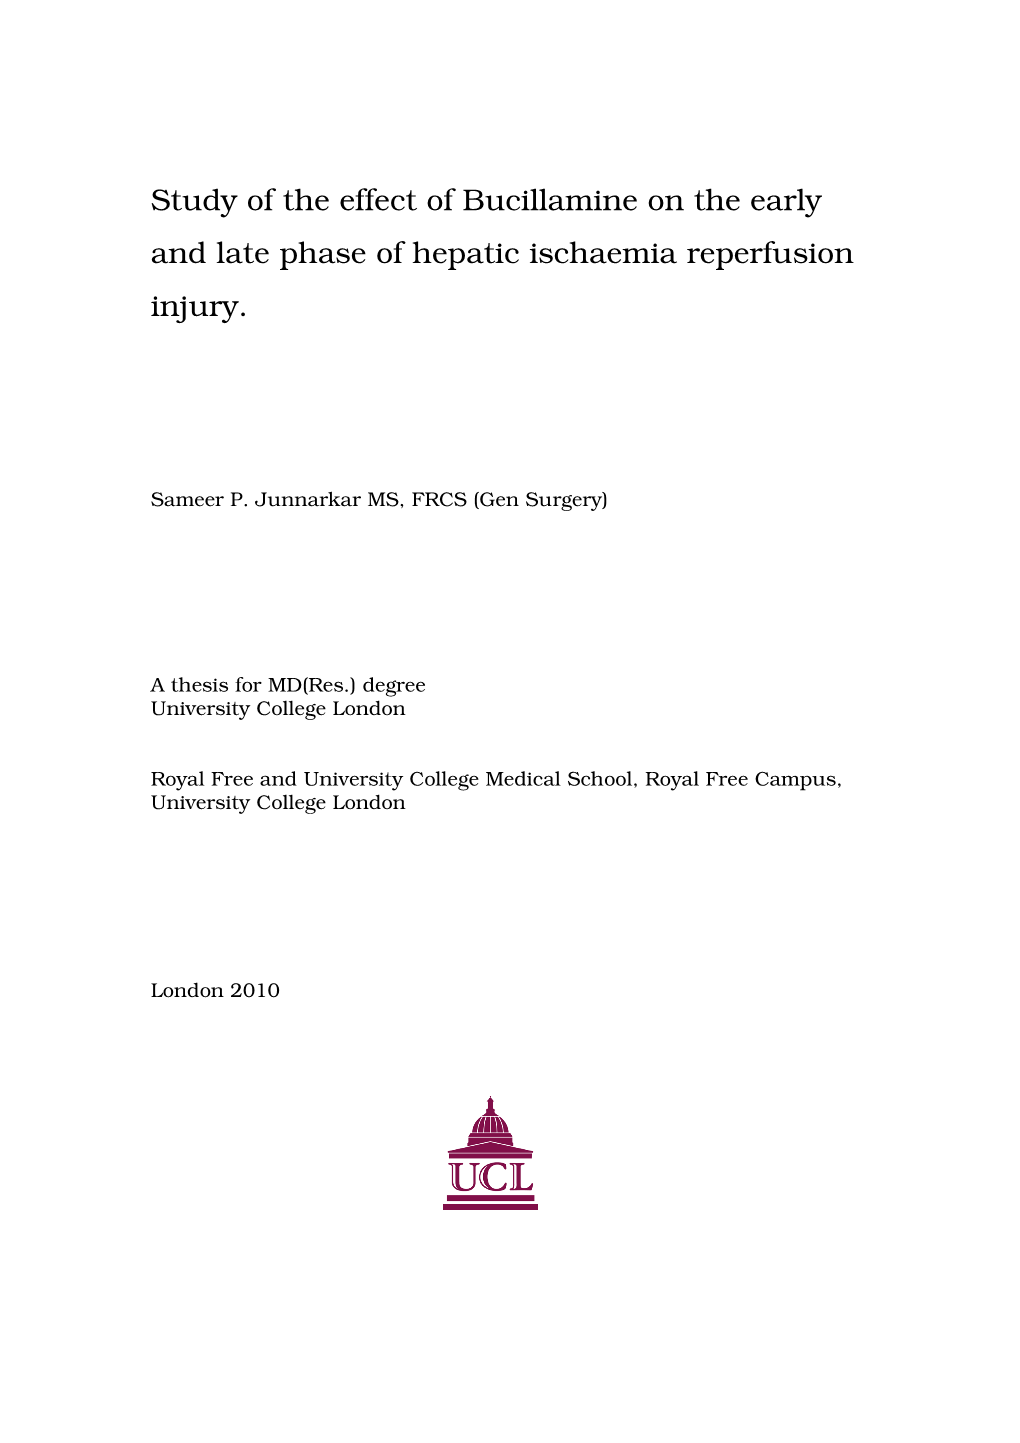 Study of the Effect of Bucillamine on the Early and Late Phase of Hepatic Ischaemia Reperfusion Injury